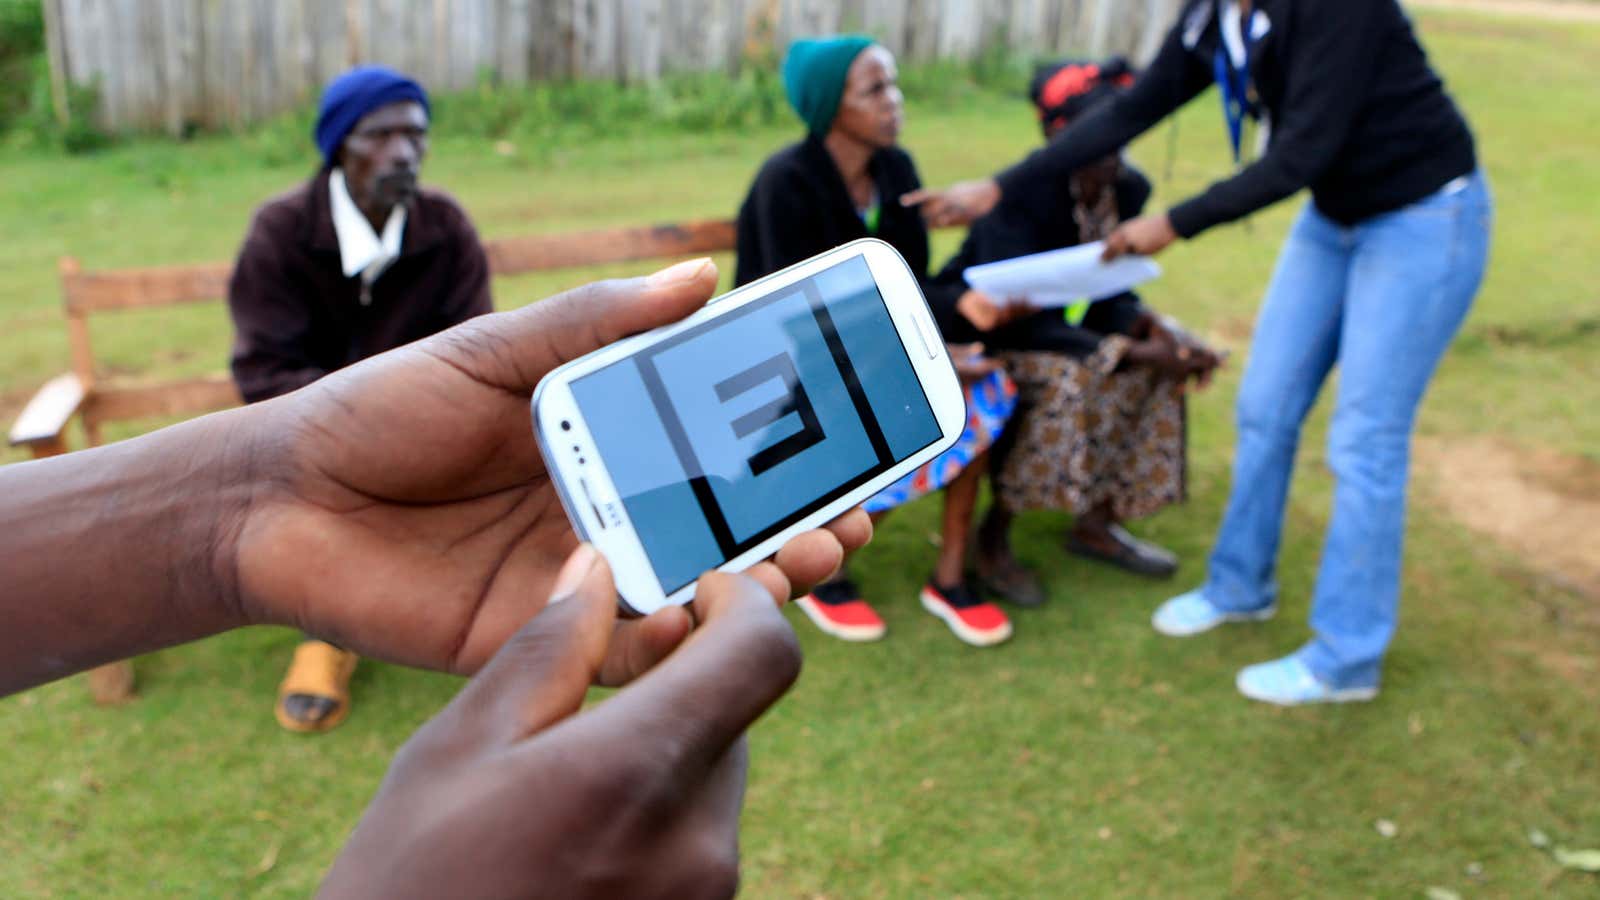 Kenya’s mobile sector offers exploding opportunities.